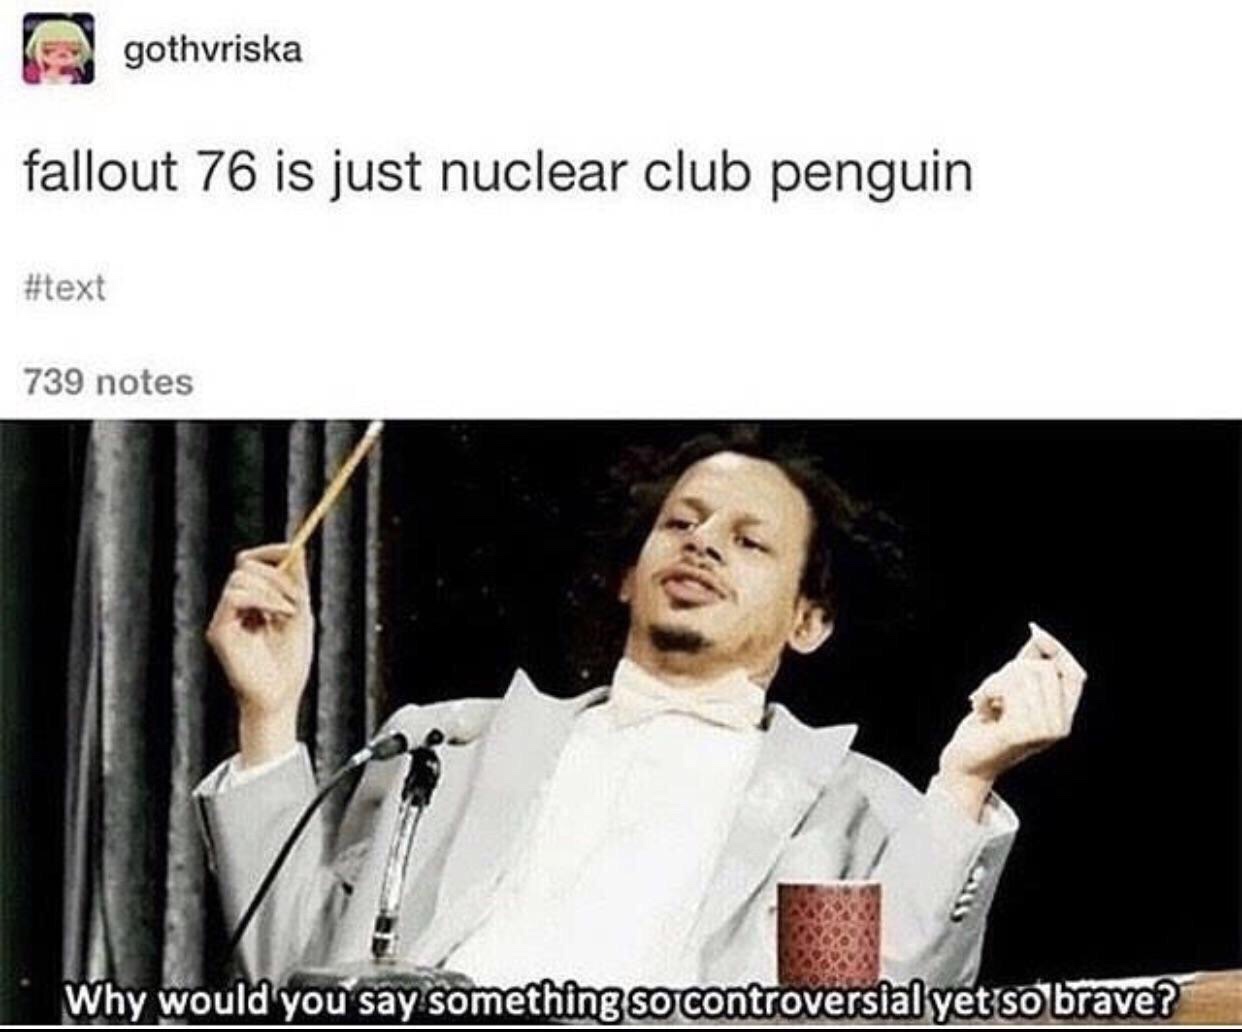 dank memes would you say something so controversial meme - gothvriska fallout 76 is just nuclear club penguin 739 notes Why would you say something so controversial yet so brave?